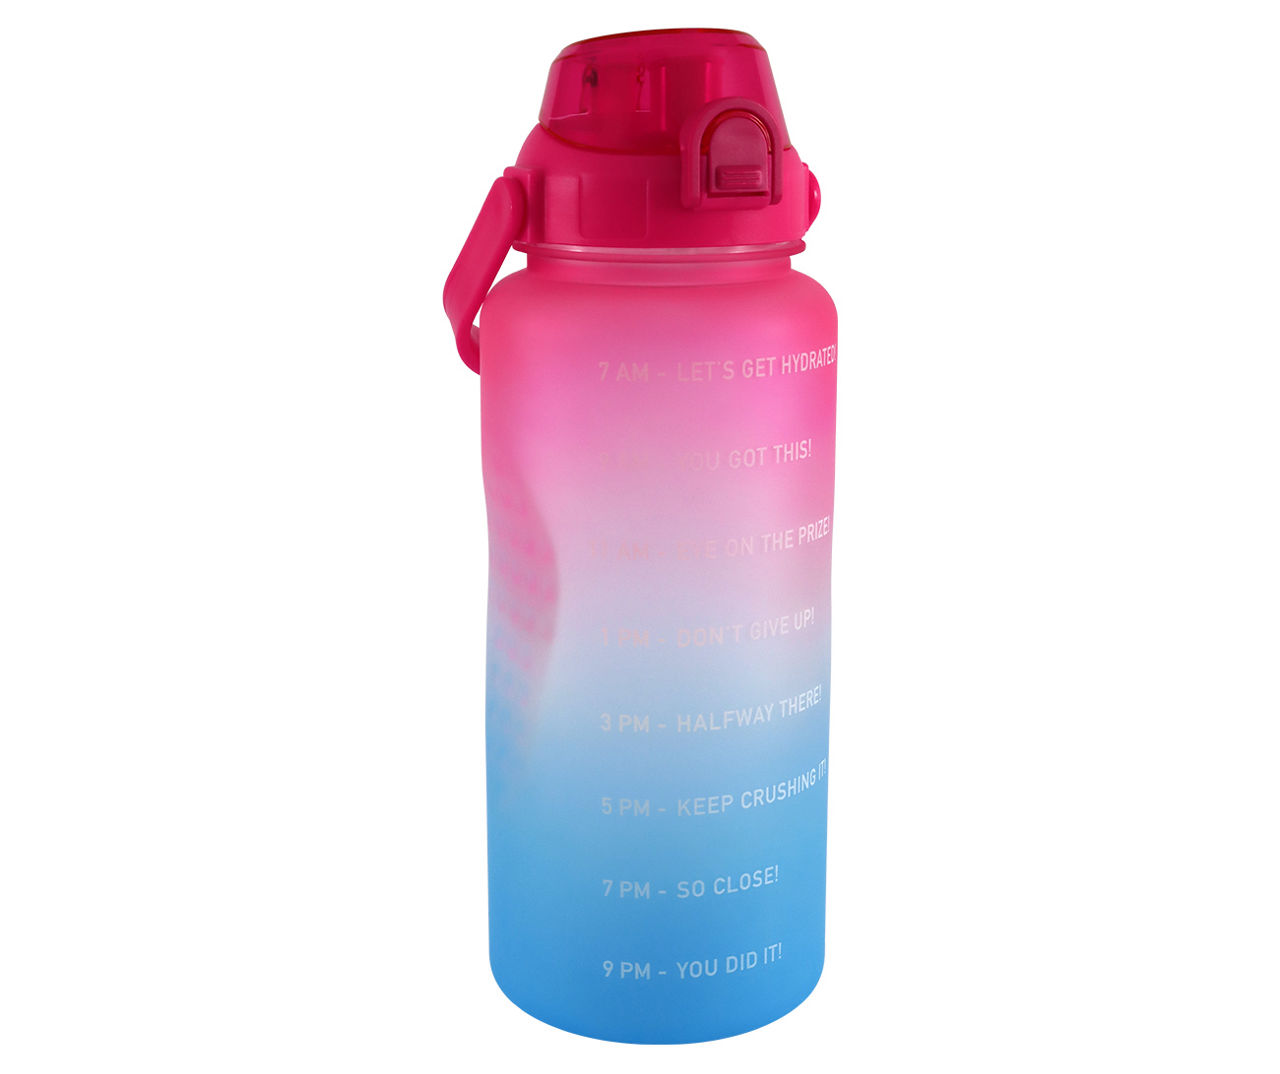 Who wouldn't want a giant water bottle that is so big it needs its own